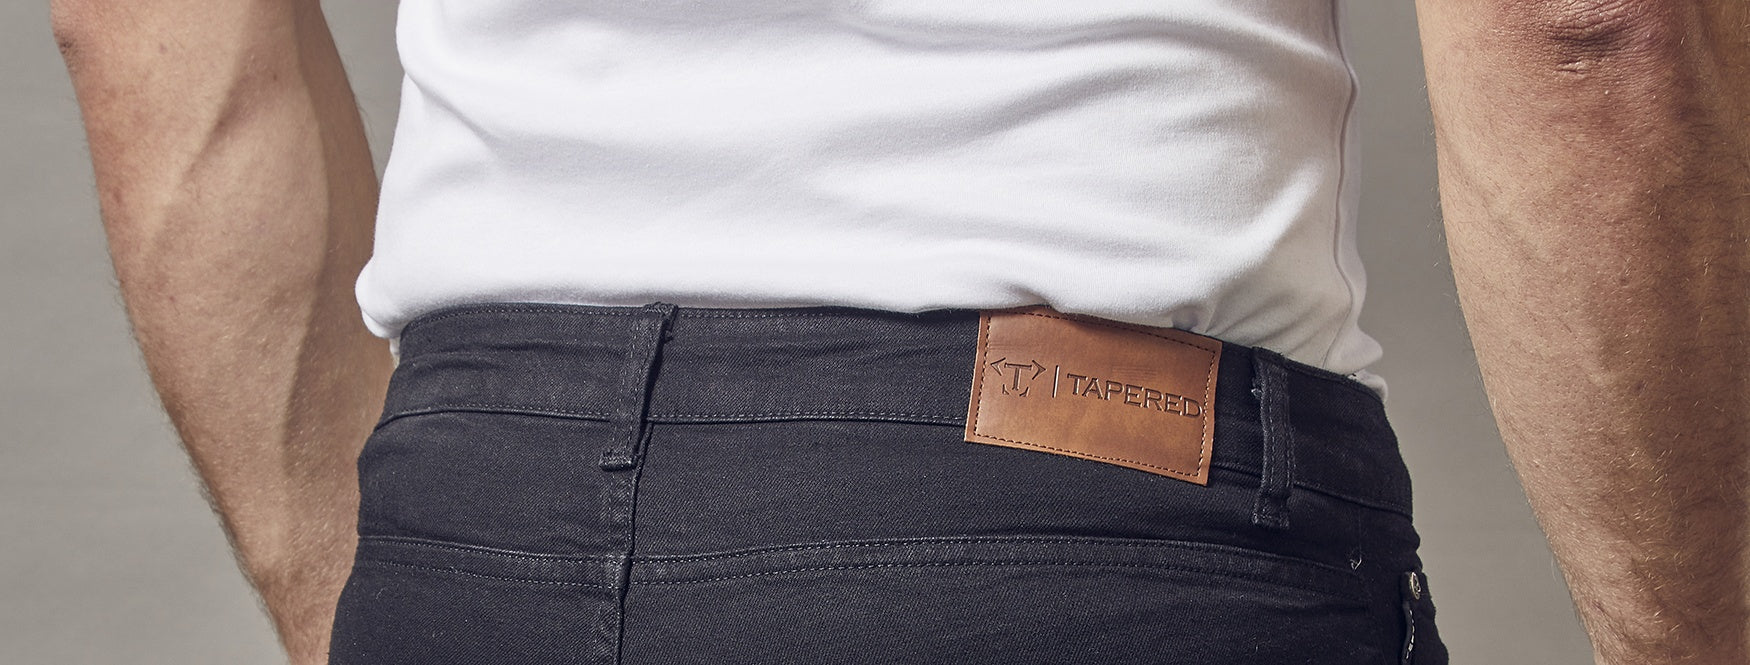 Would you prefer low rise, mid or high rise jeans? Are they